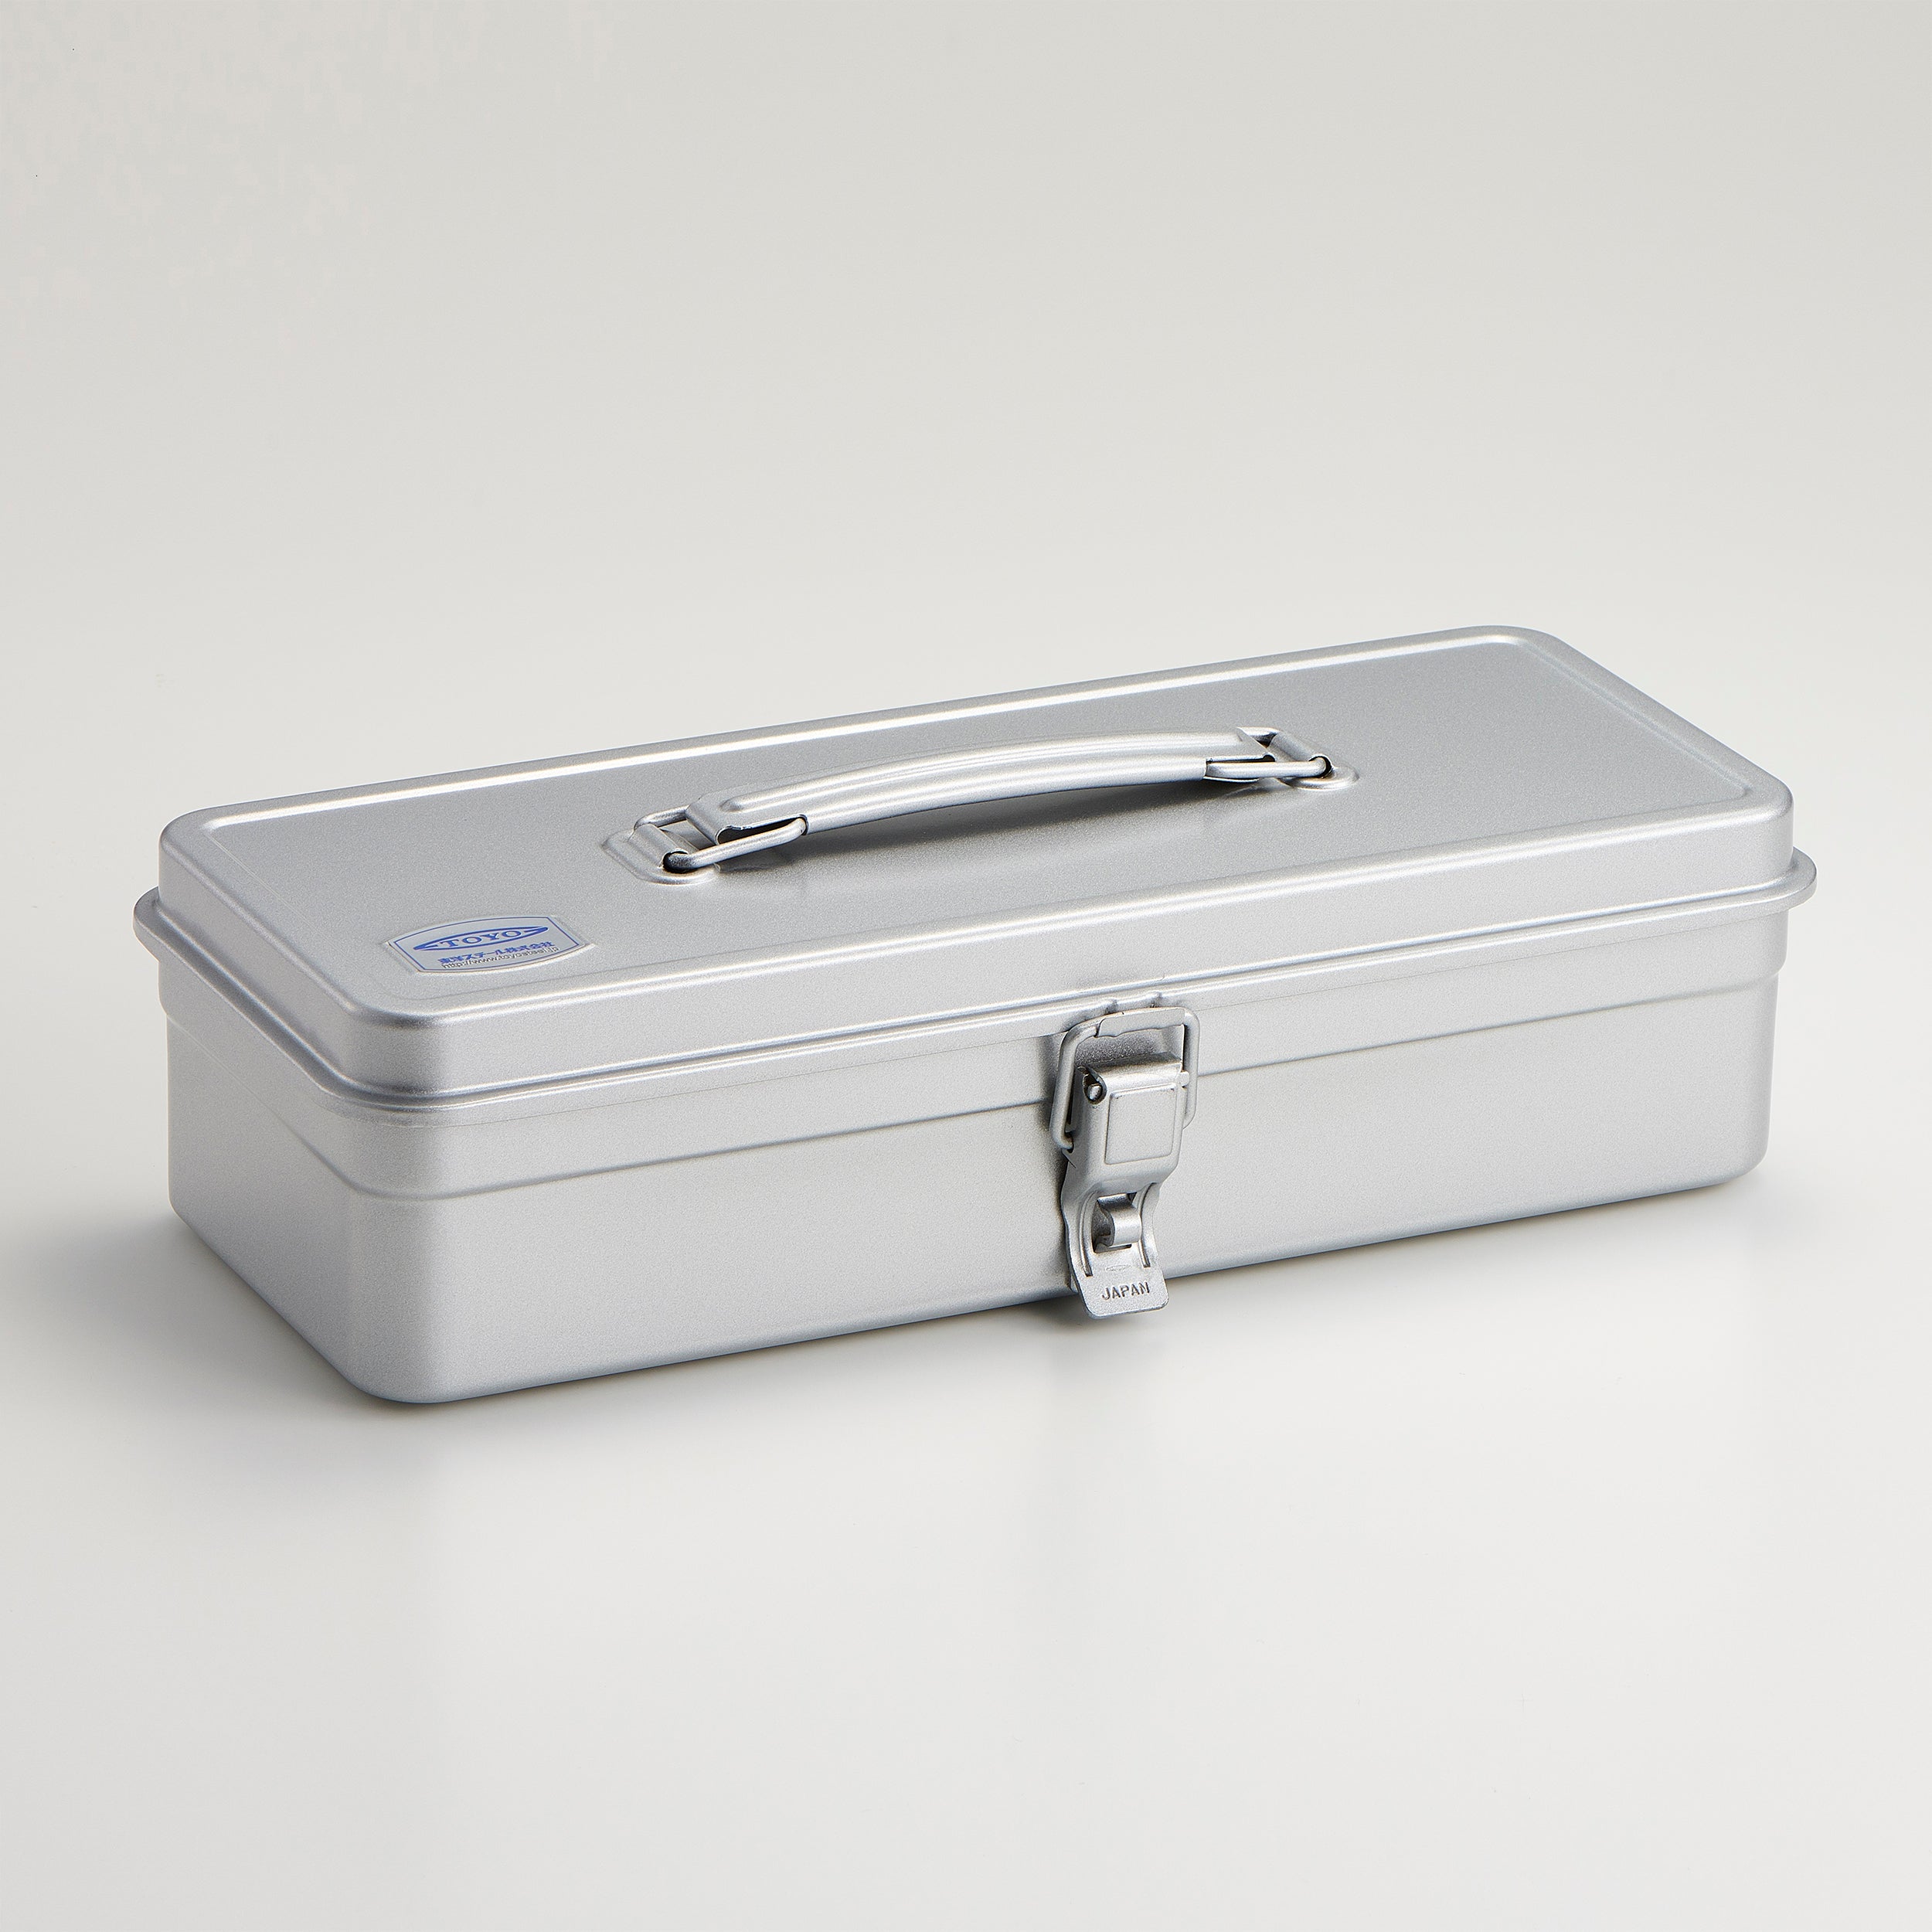 TOYO toolbox for your daily life